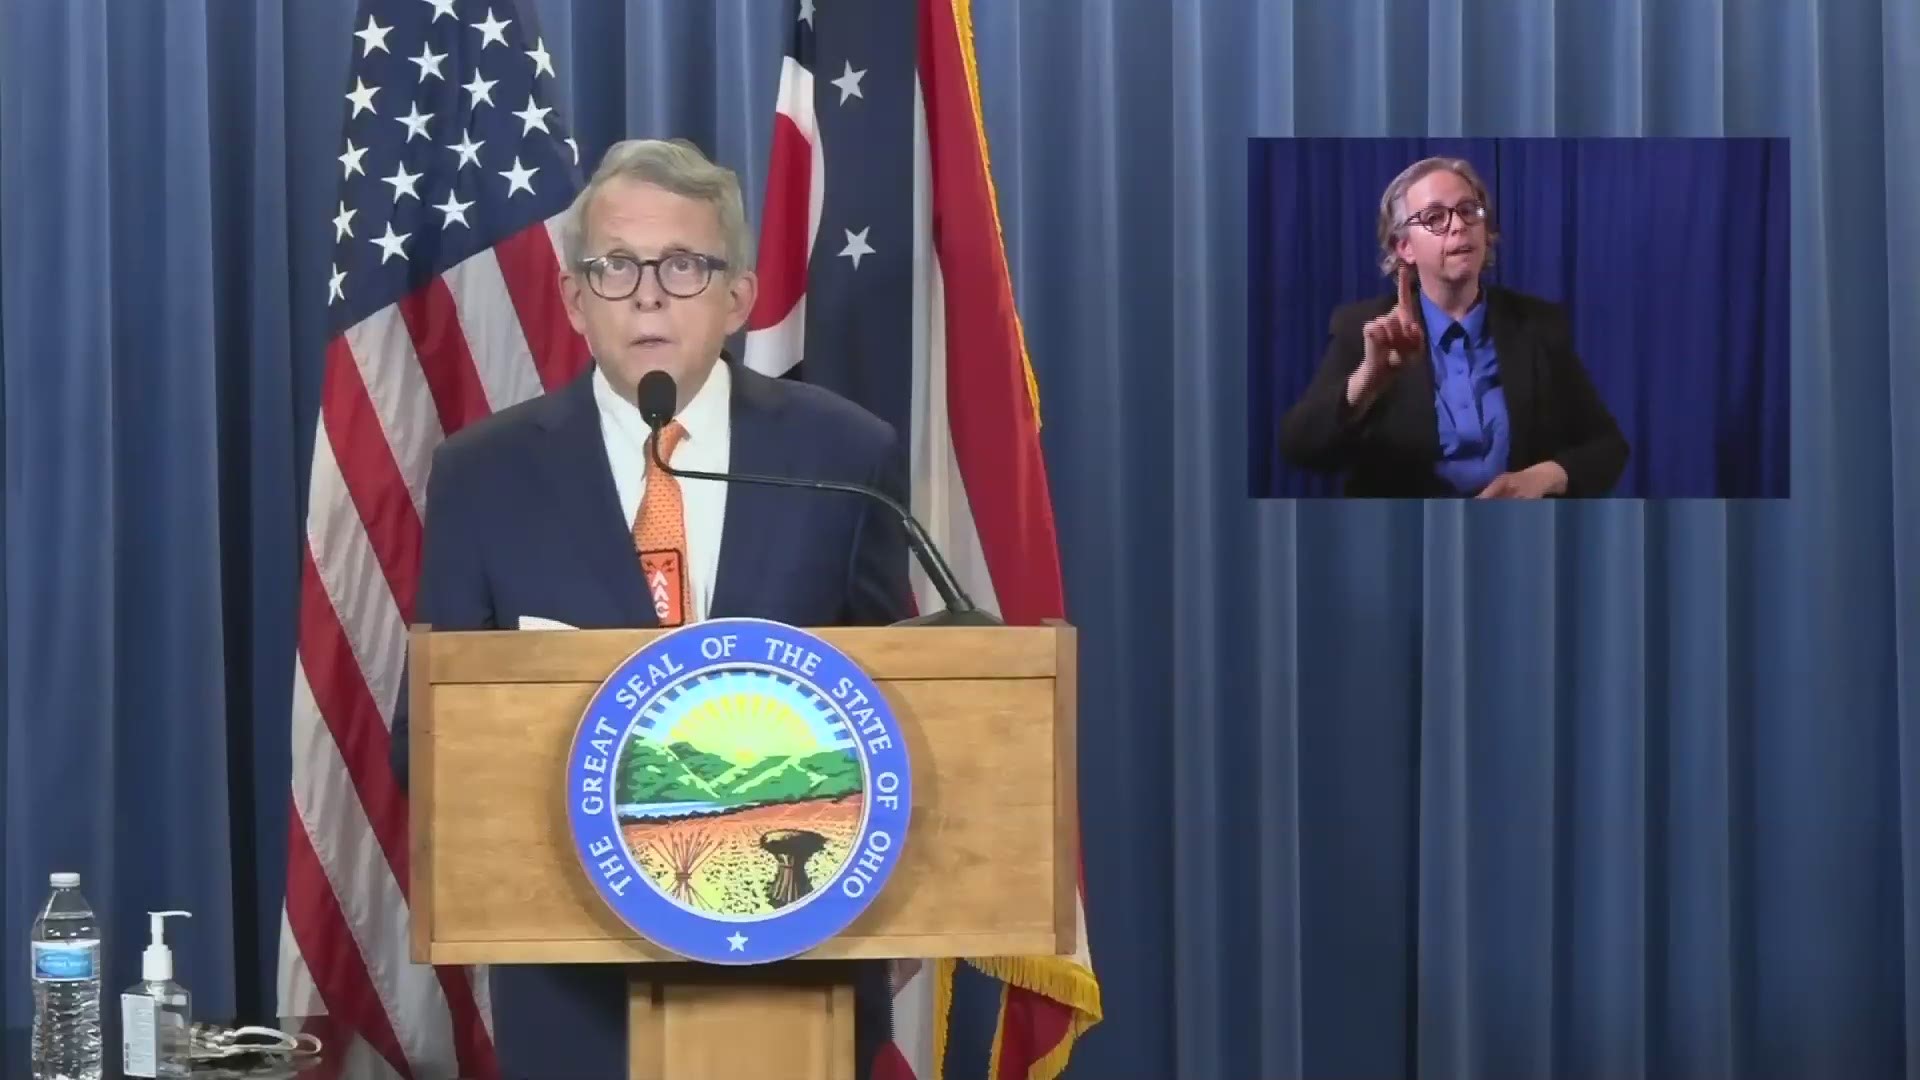 Ohio Governor Mike DeWine announced on Wednesday that he's proposing mandatory psychological exams and increased training for police applicants.